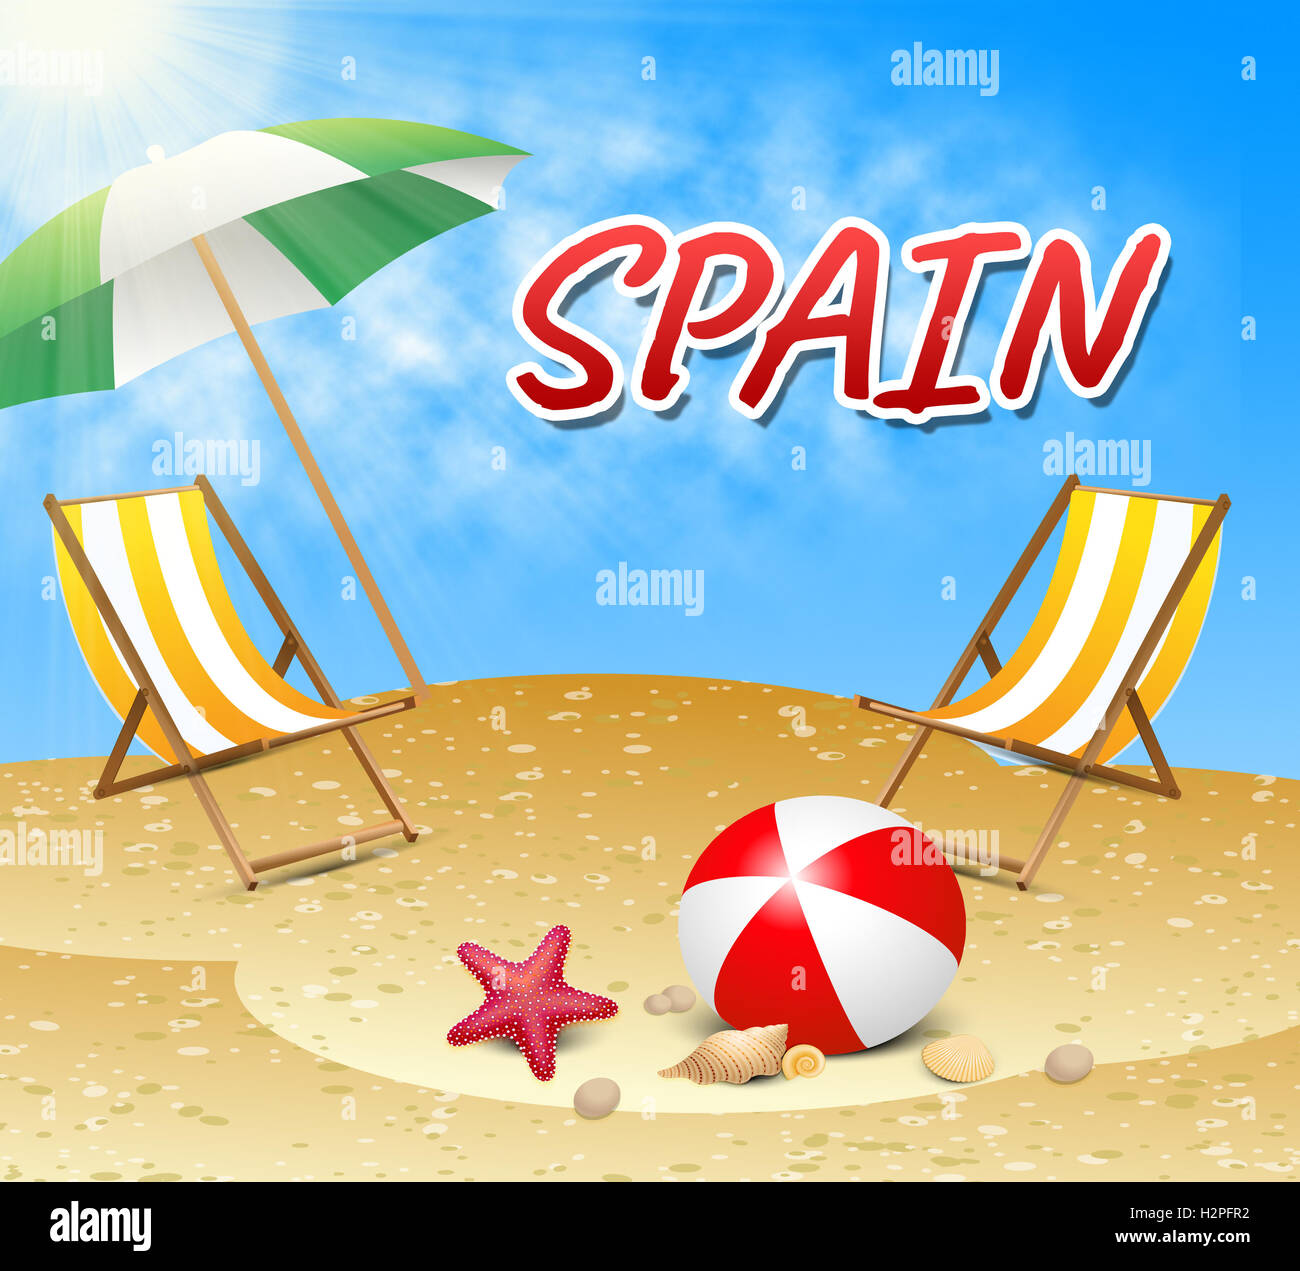 Spain Vacations Showing Seaside Beach And Sun Stock Photo